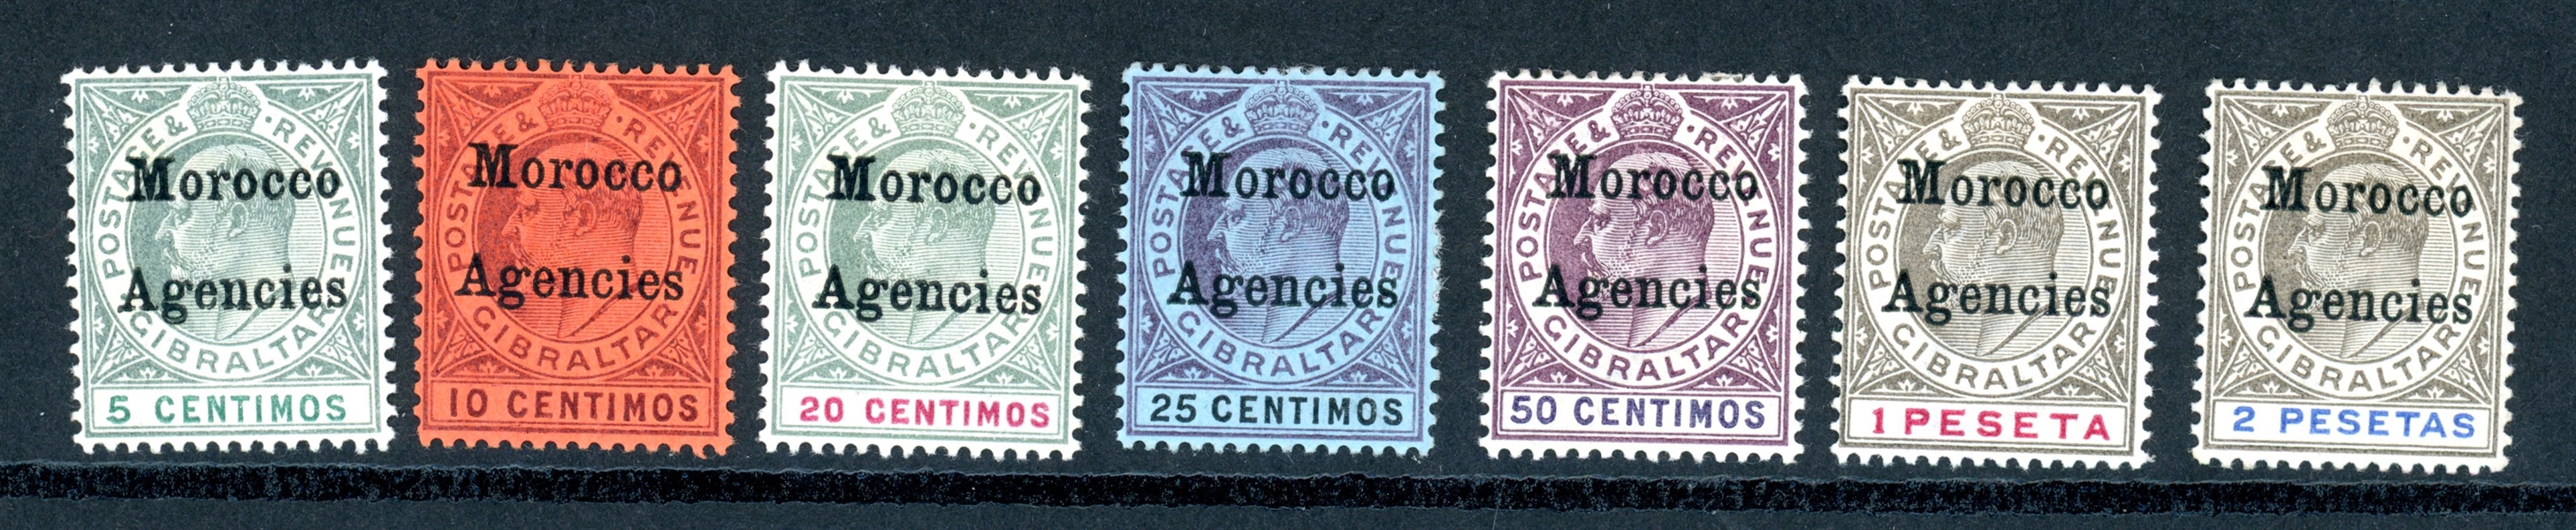 Great Britain Offices in Morocco Scott 20-26 MH Complete Set (SCV $255)